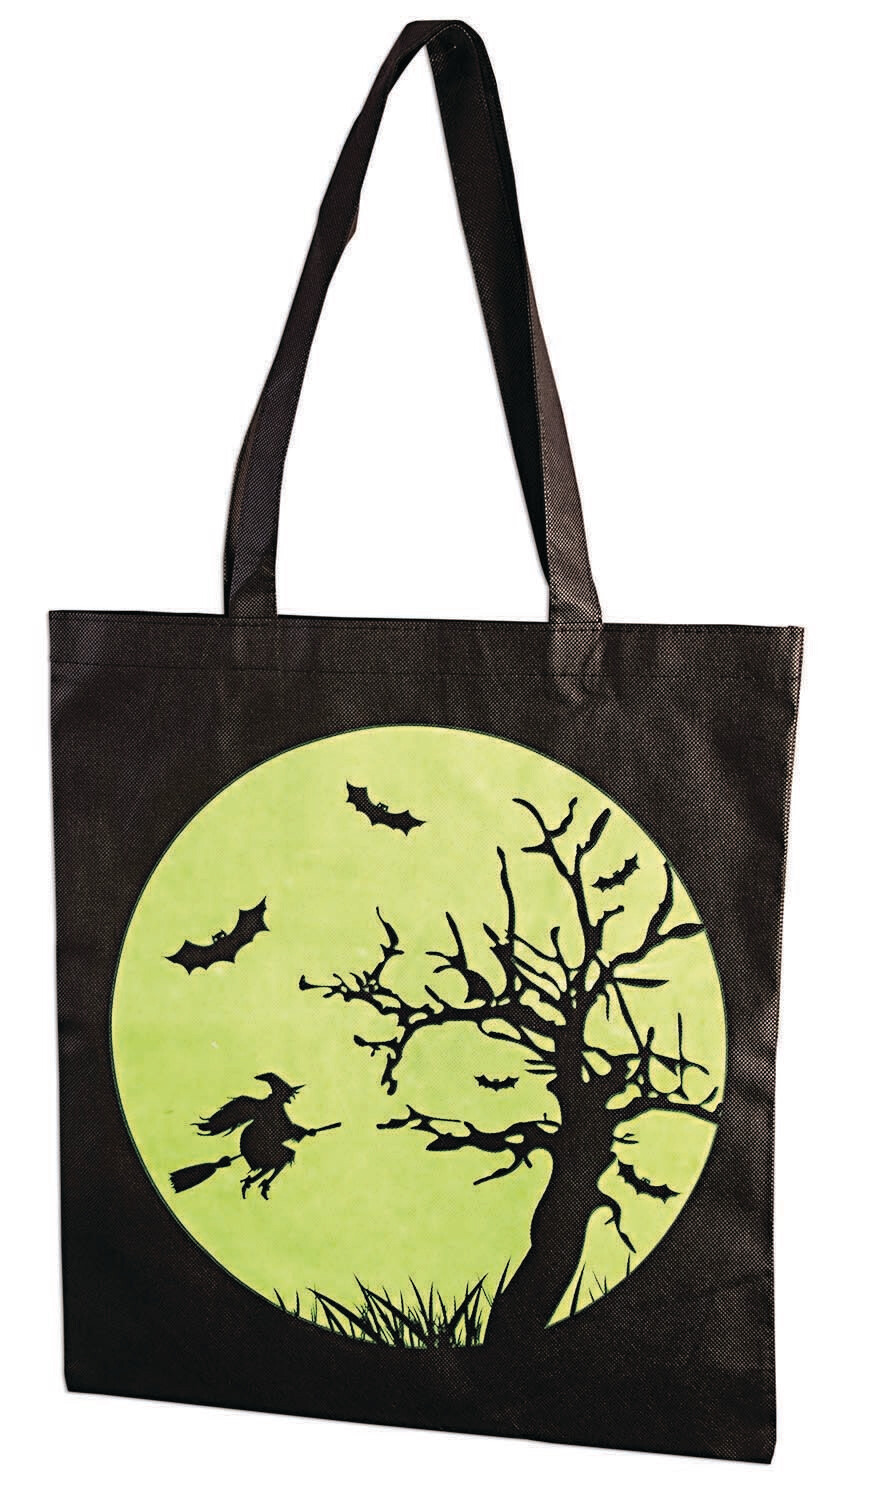 Glow in the Dark Totes